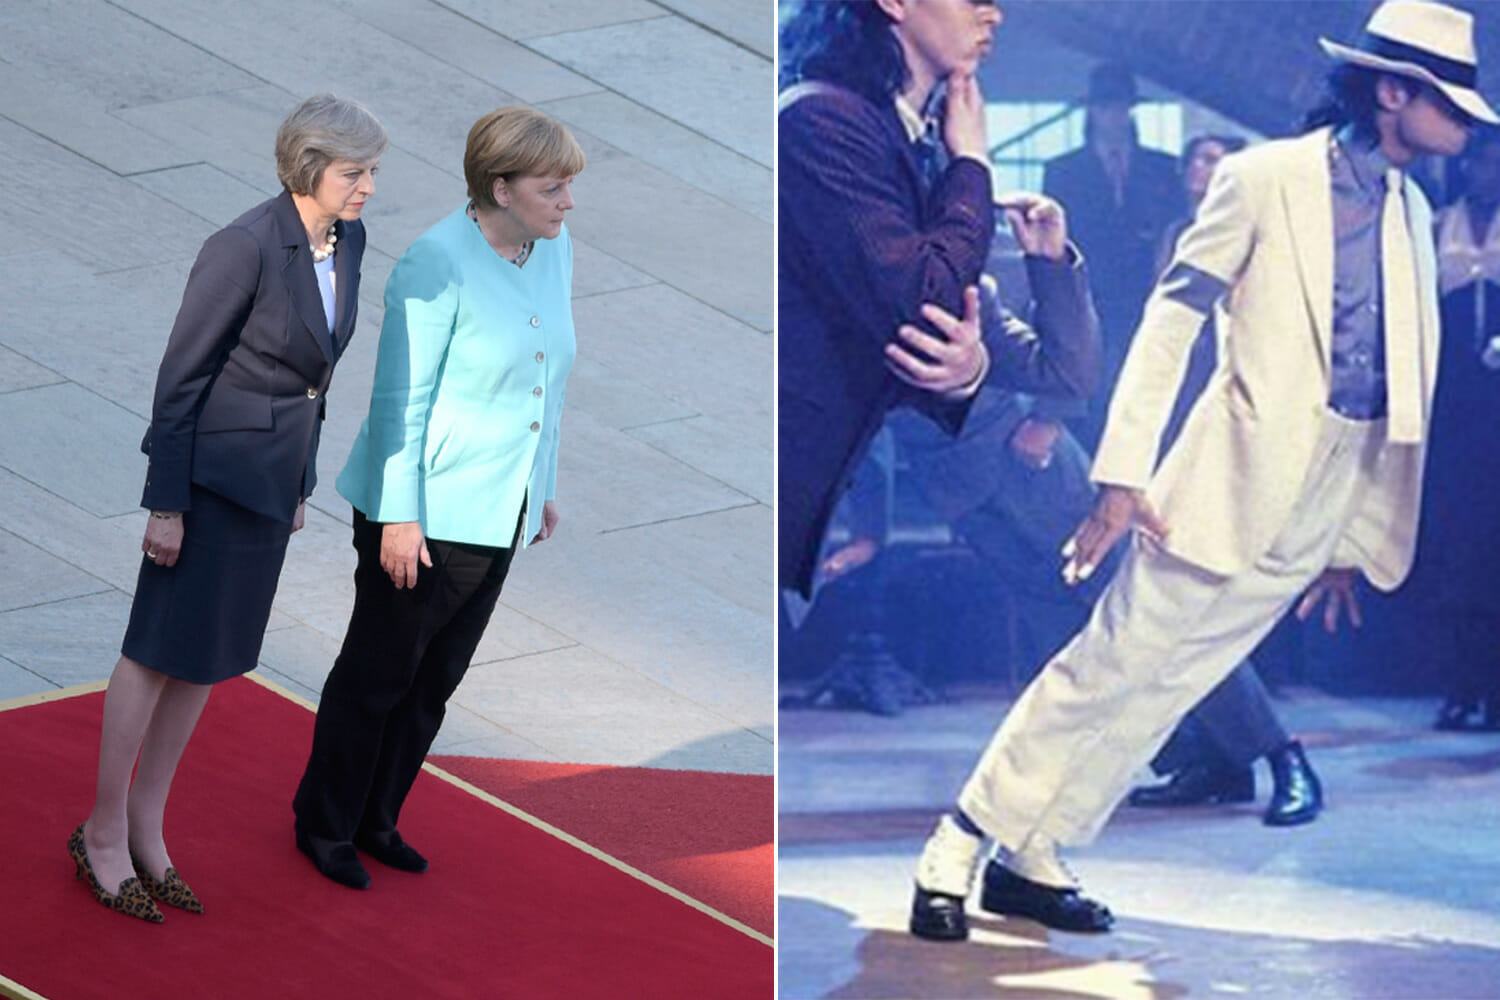 Michael Jackson evoked by Theresa May and Angela Merkel thanks to weird optical illusion